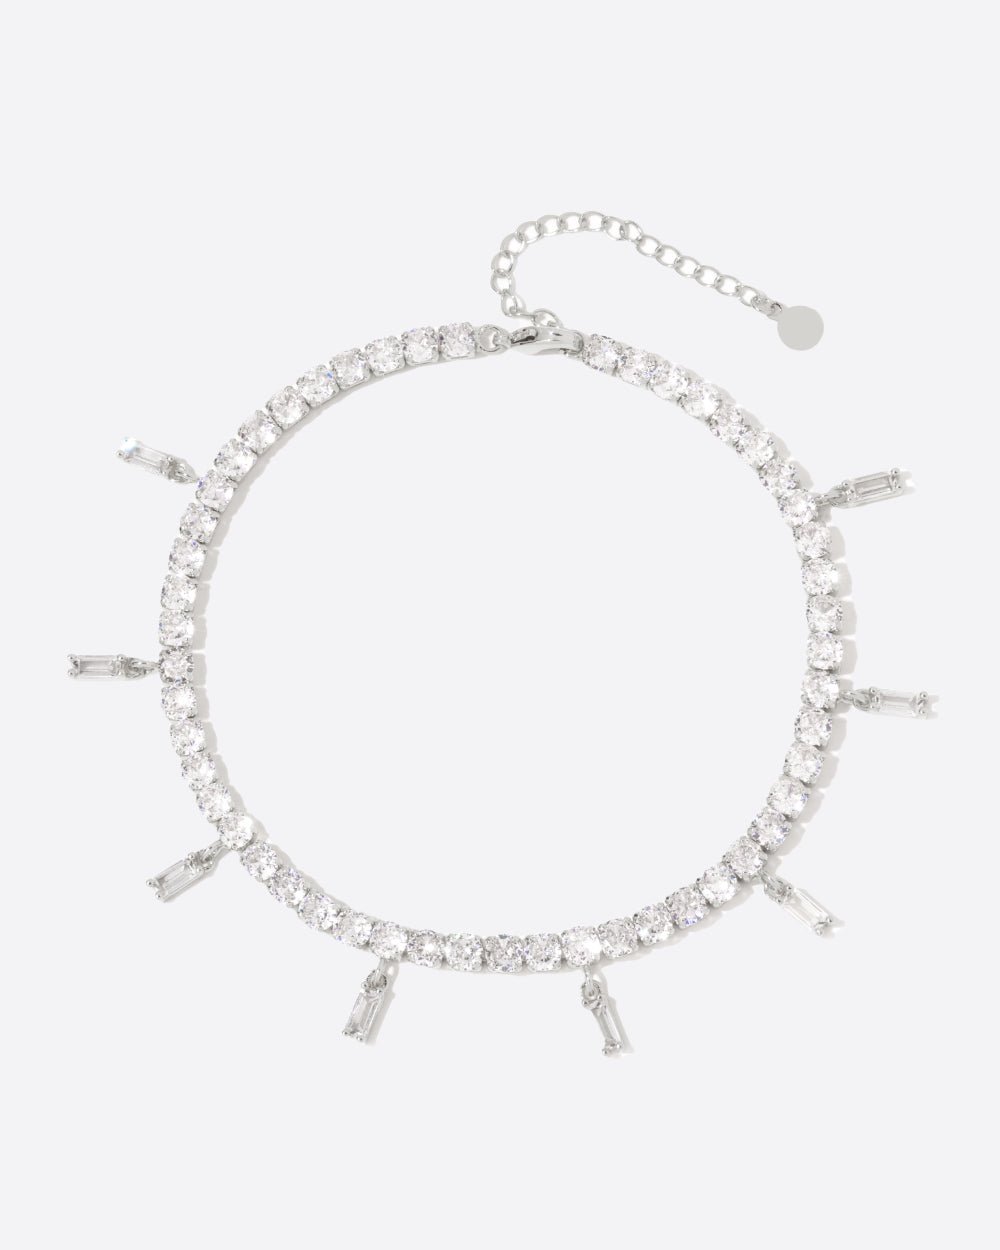 ICED BAGUETTE TENNIS ANKLET. - 4MM WHITE GOLD - Drippy Amsterdam